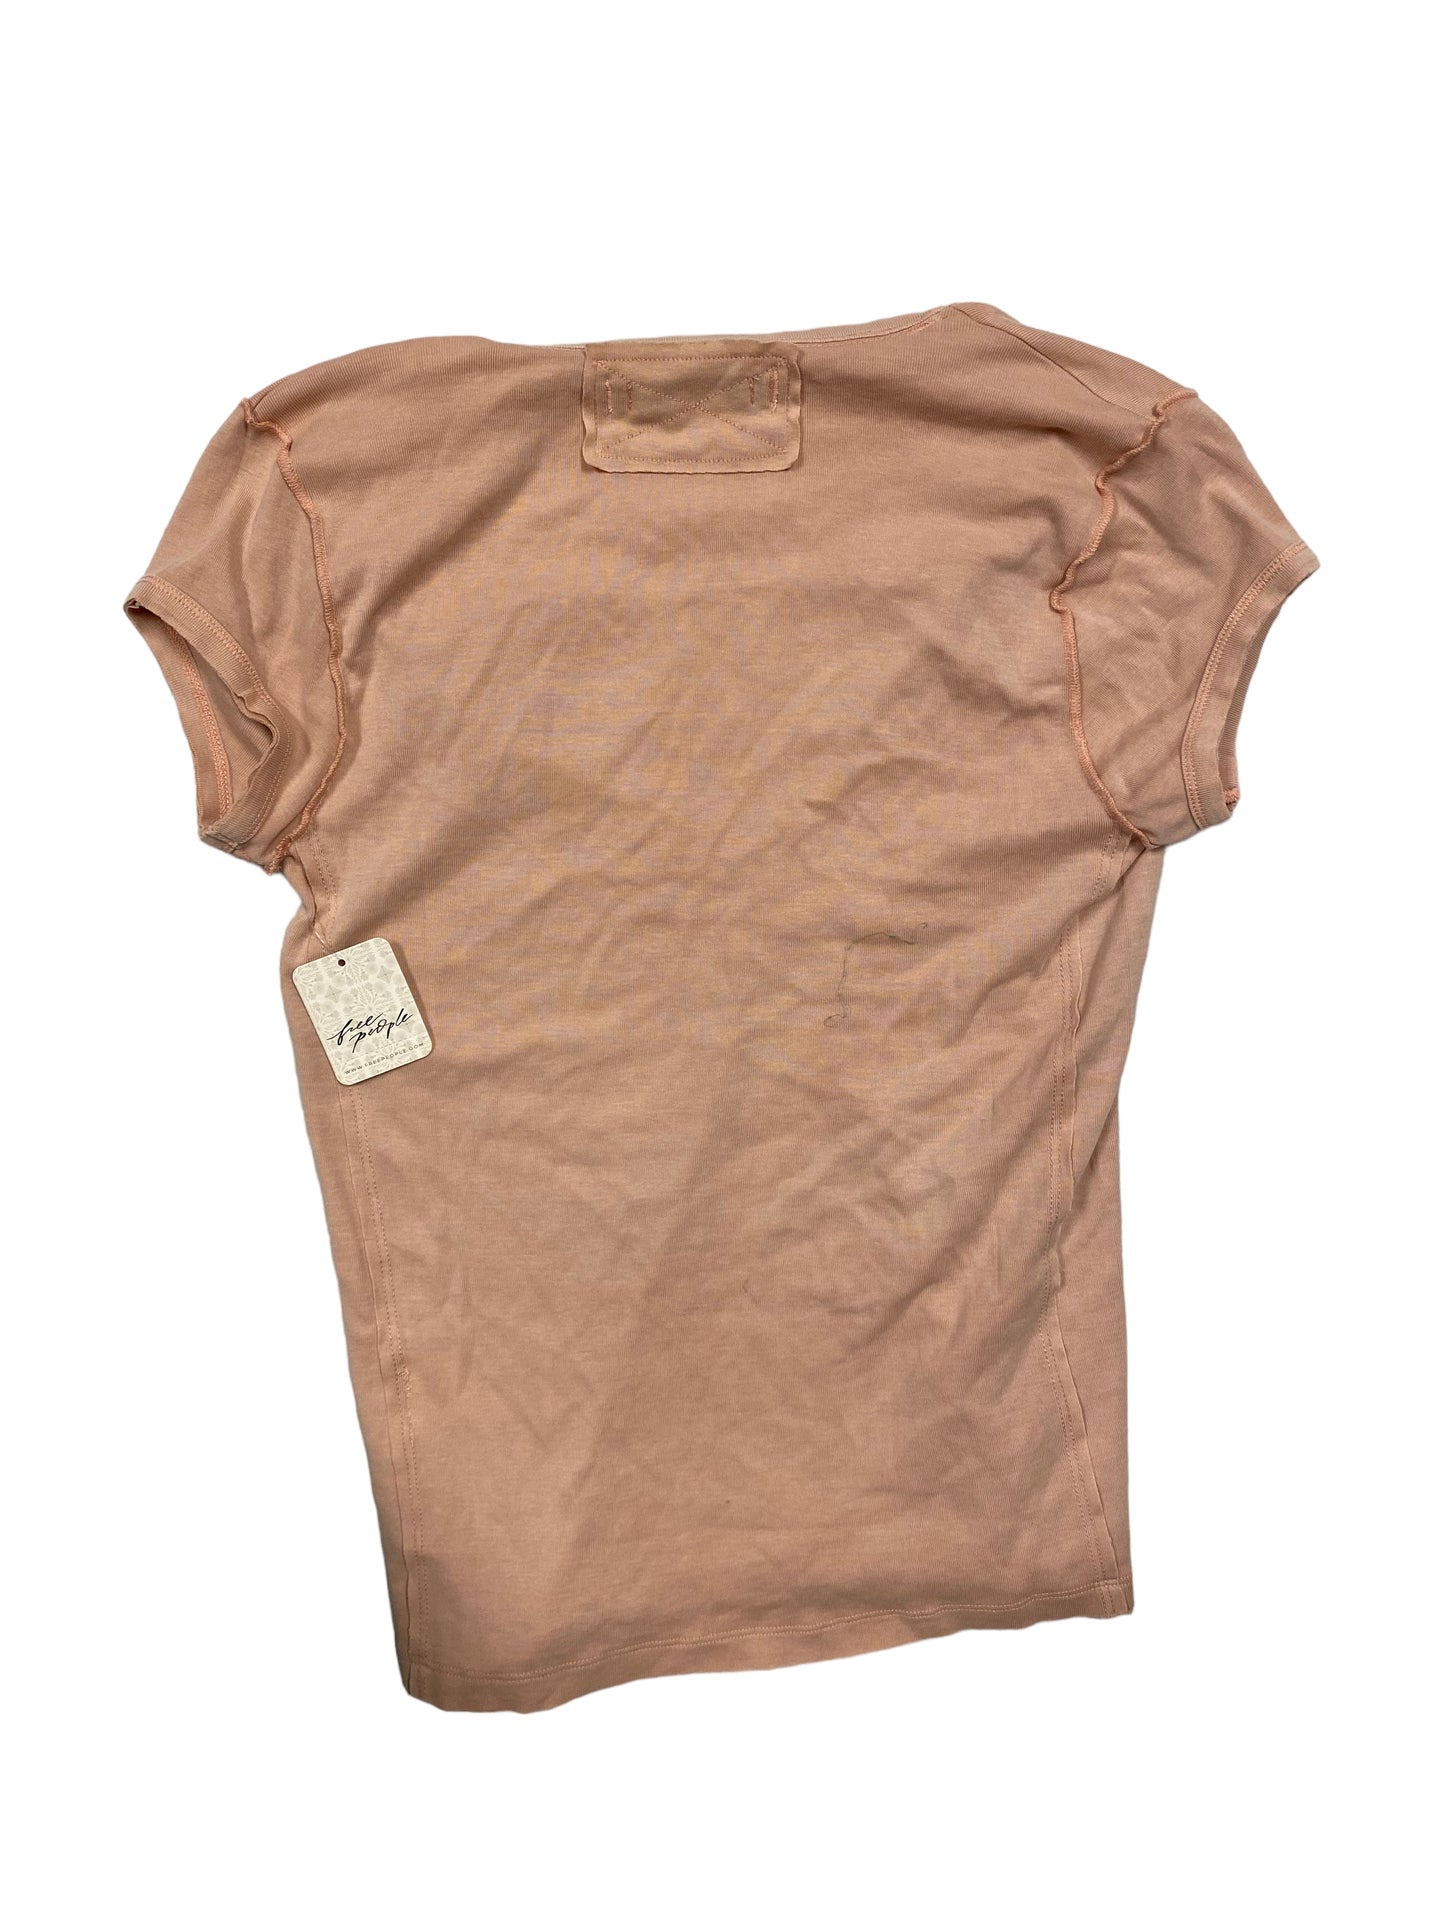 Peach Top Short Sleeve We The Free, Size Xs